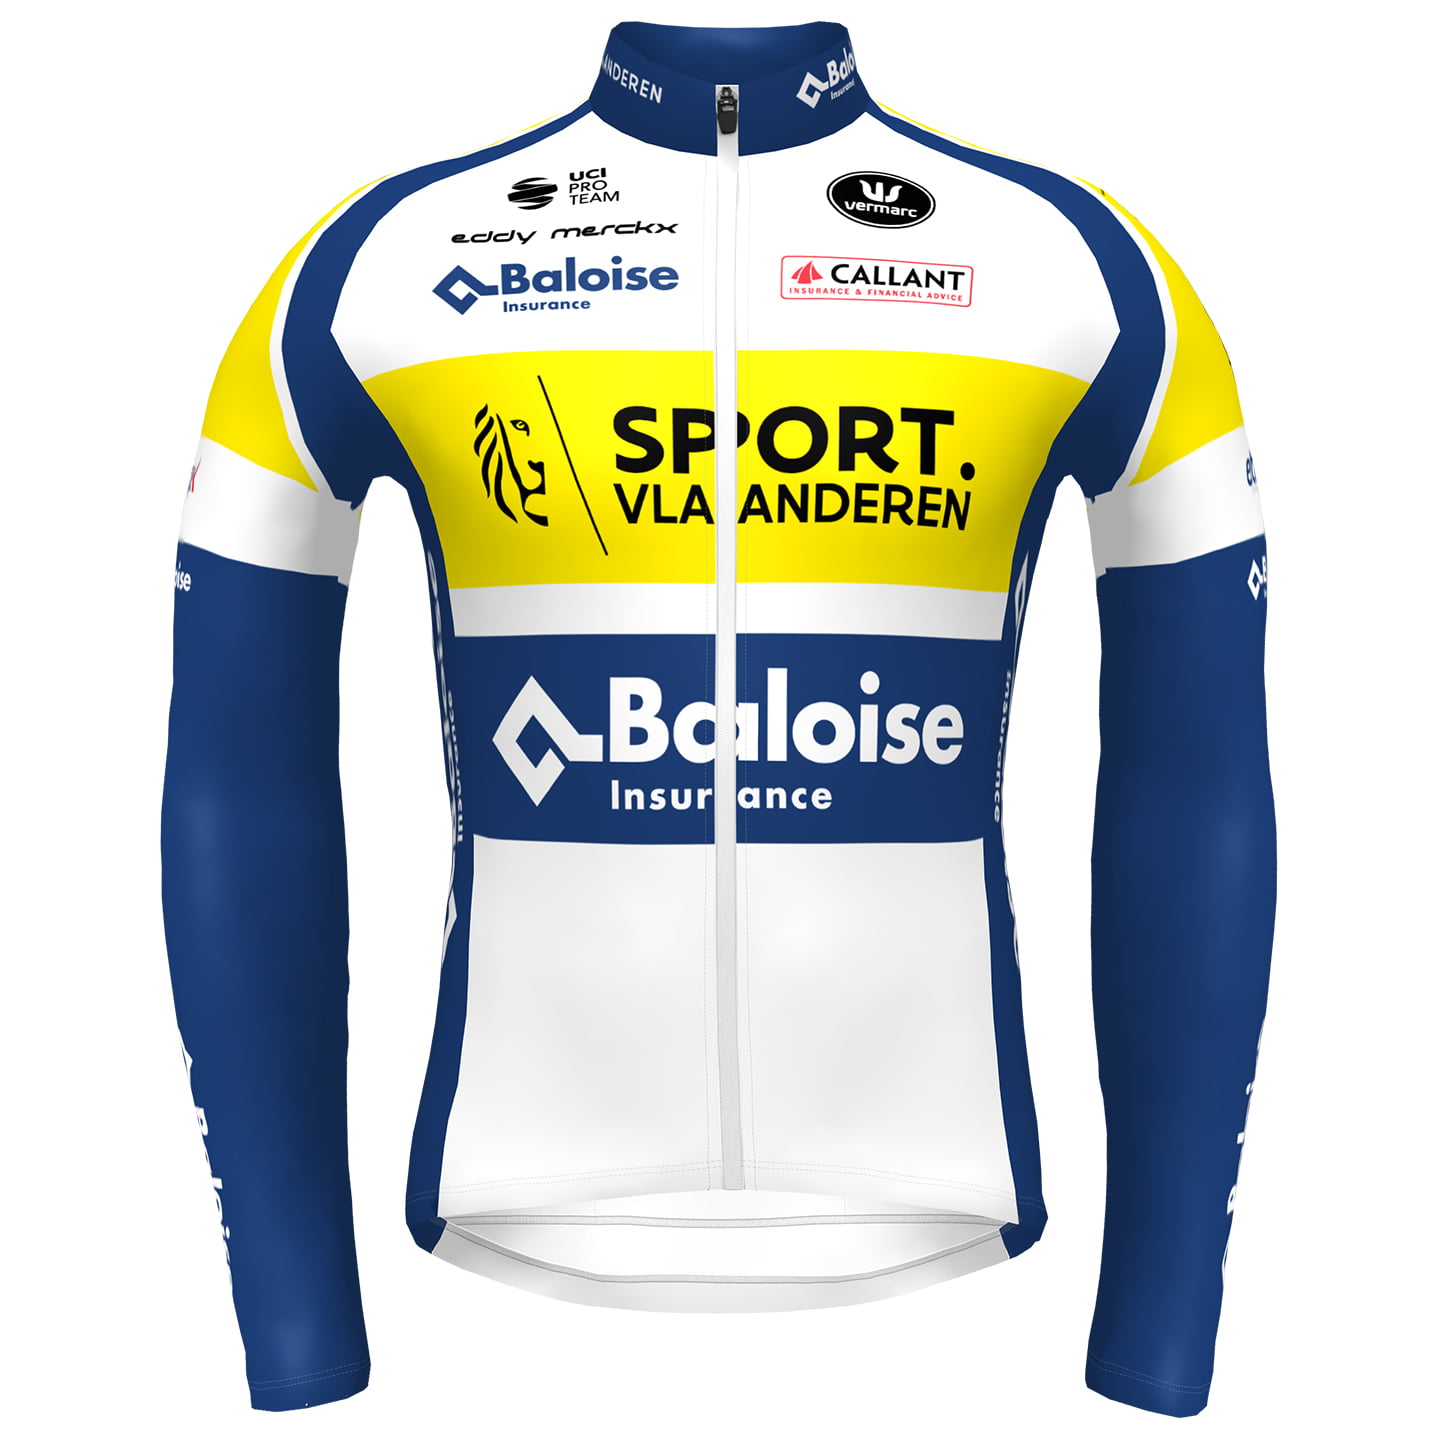 SPORT VLAANDEREN-BALOISE 2022 Long Sleeve Jersey, for men, size M, Cycle jersey, Cycling clothing